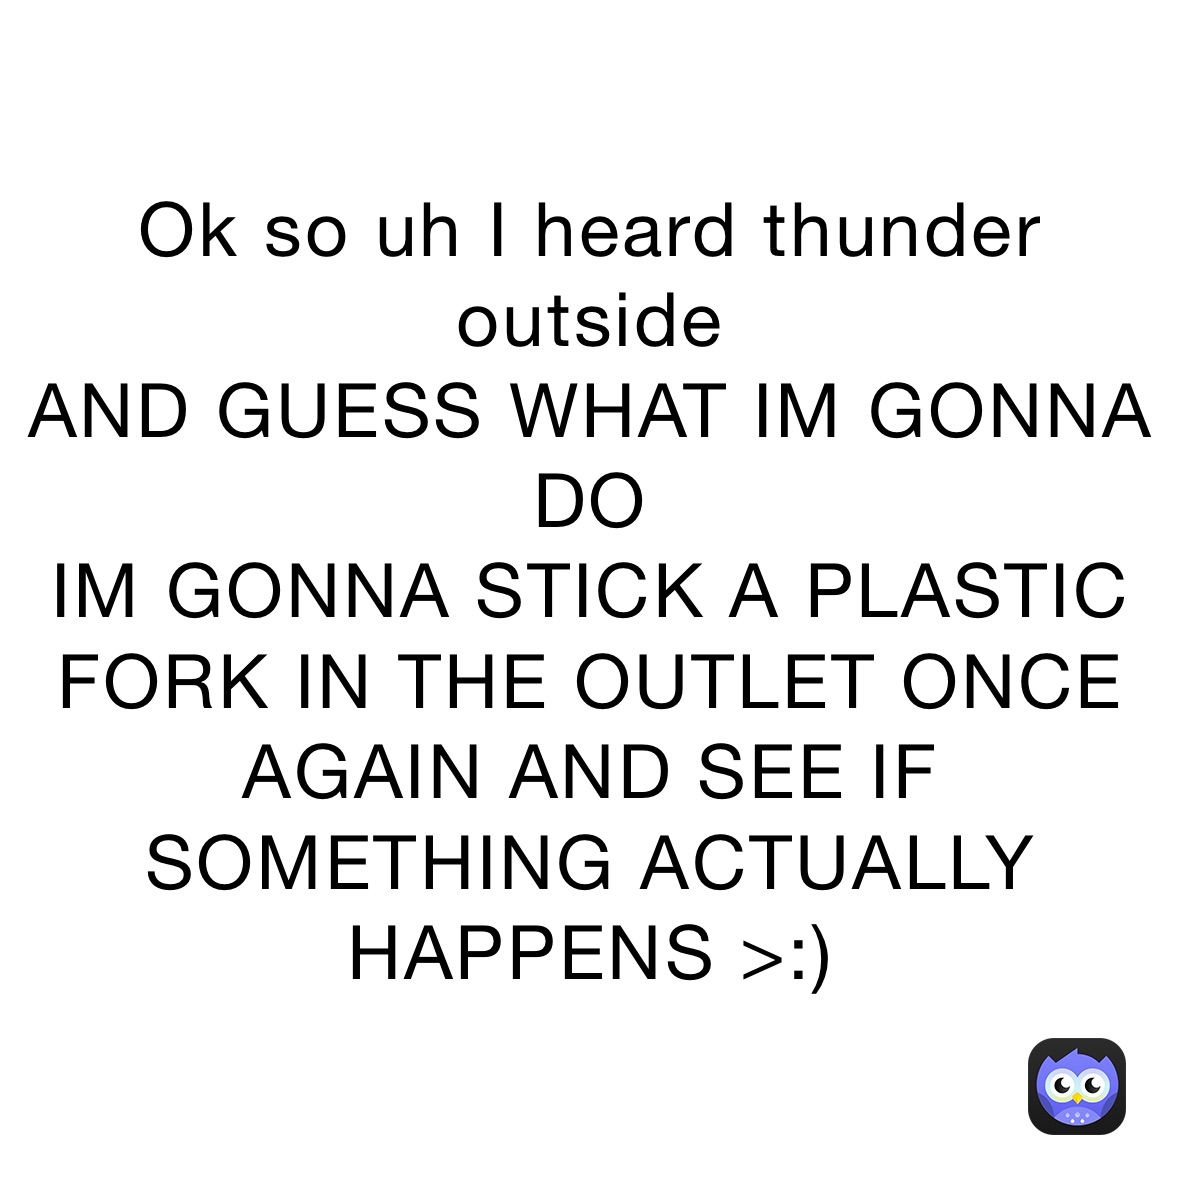 Ok so uh I heard thunder outside
AND GUESS WHAT IM GONNA DO
IM GONNA STICK A PLASTIC FORK IN THE OUTLET ONCE AGAIN AND SEE IF SOMETHING ACTUALLY HAPPENS >:)